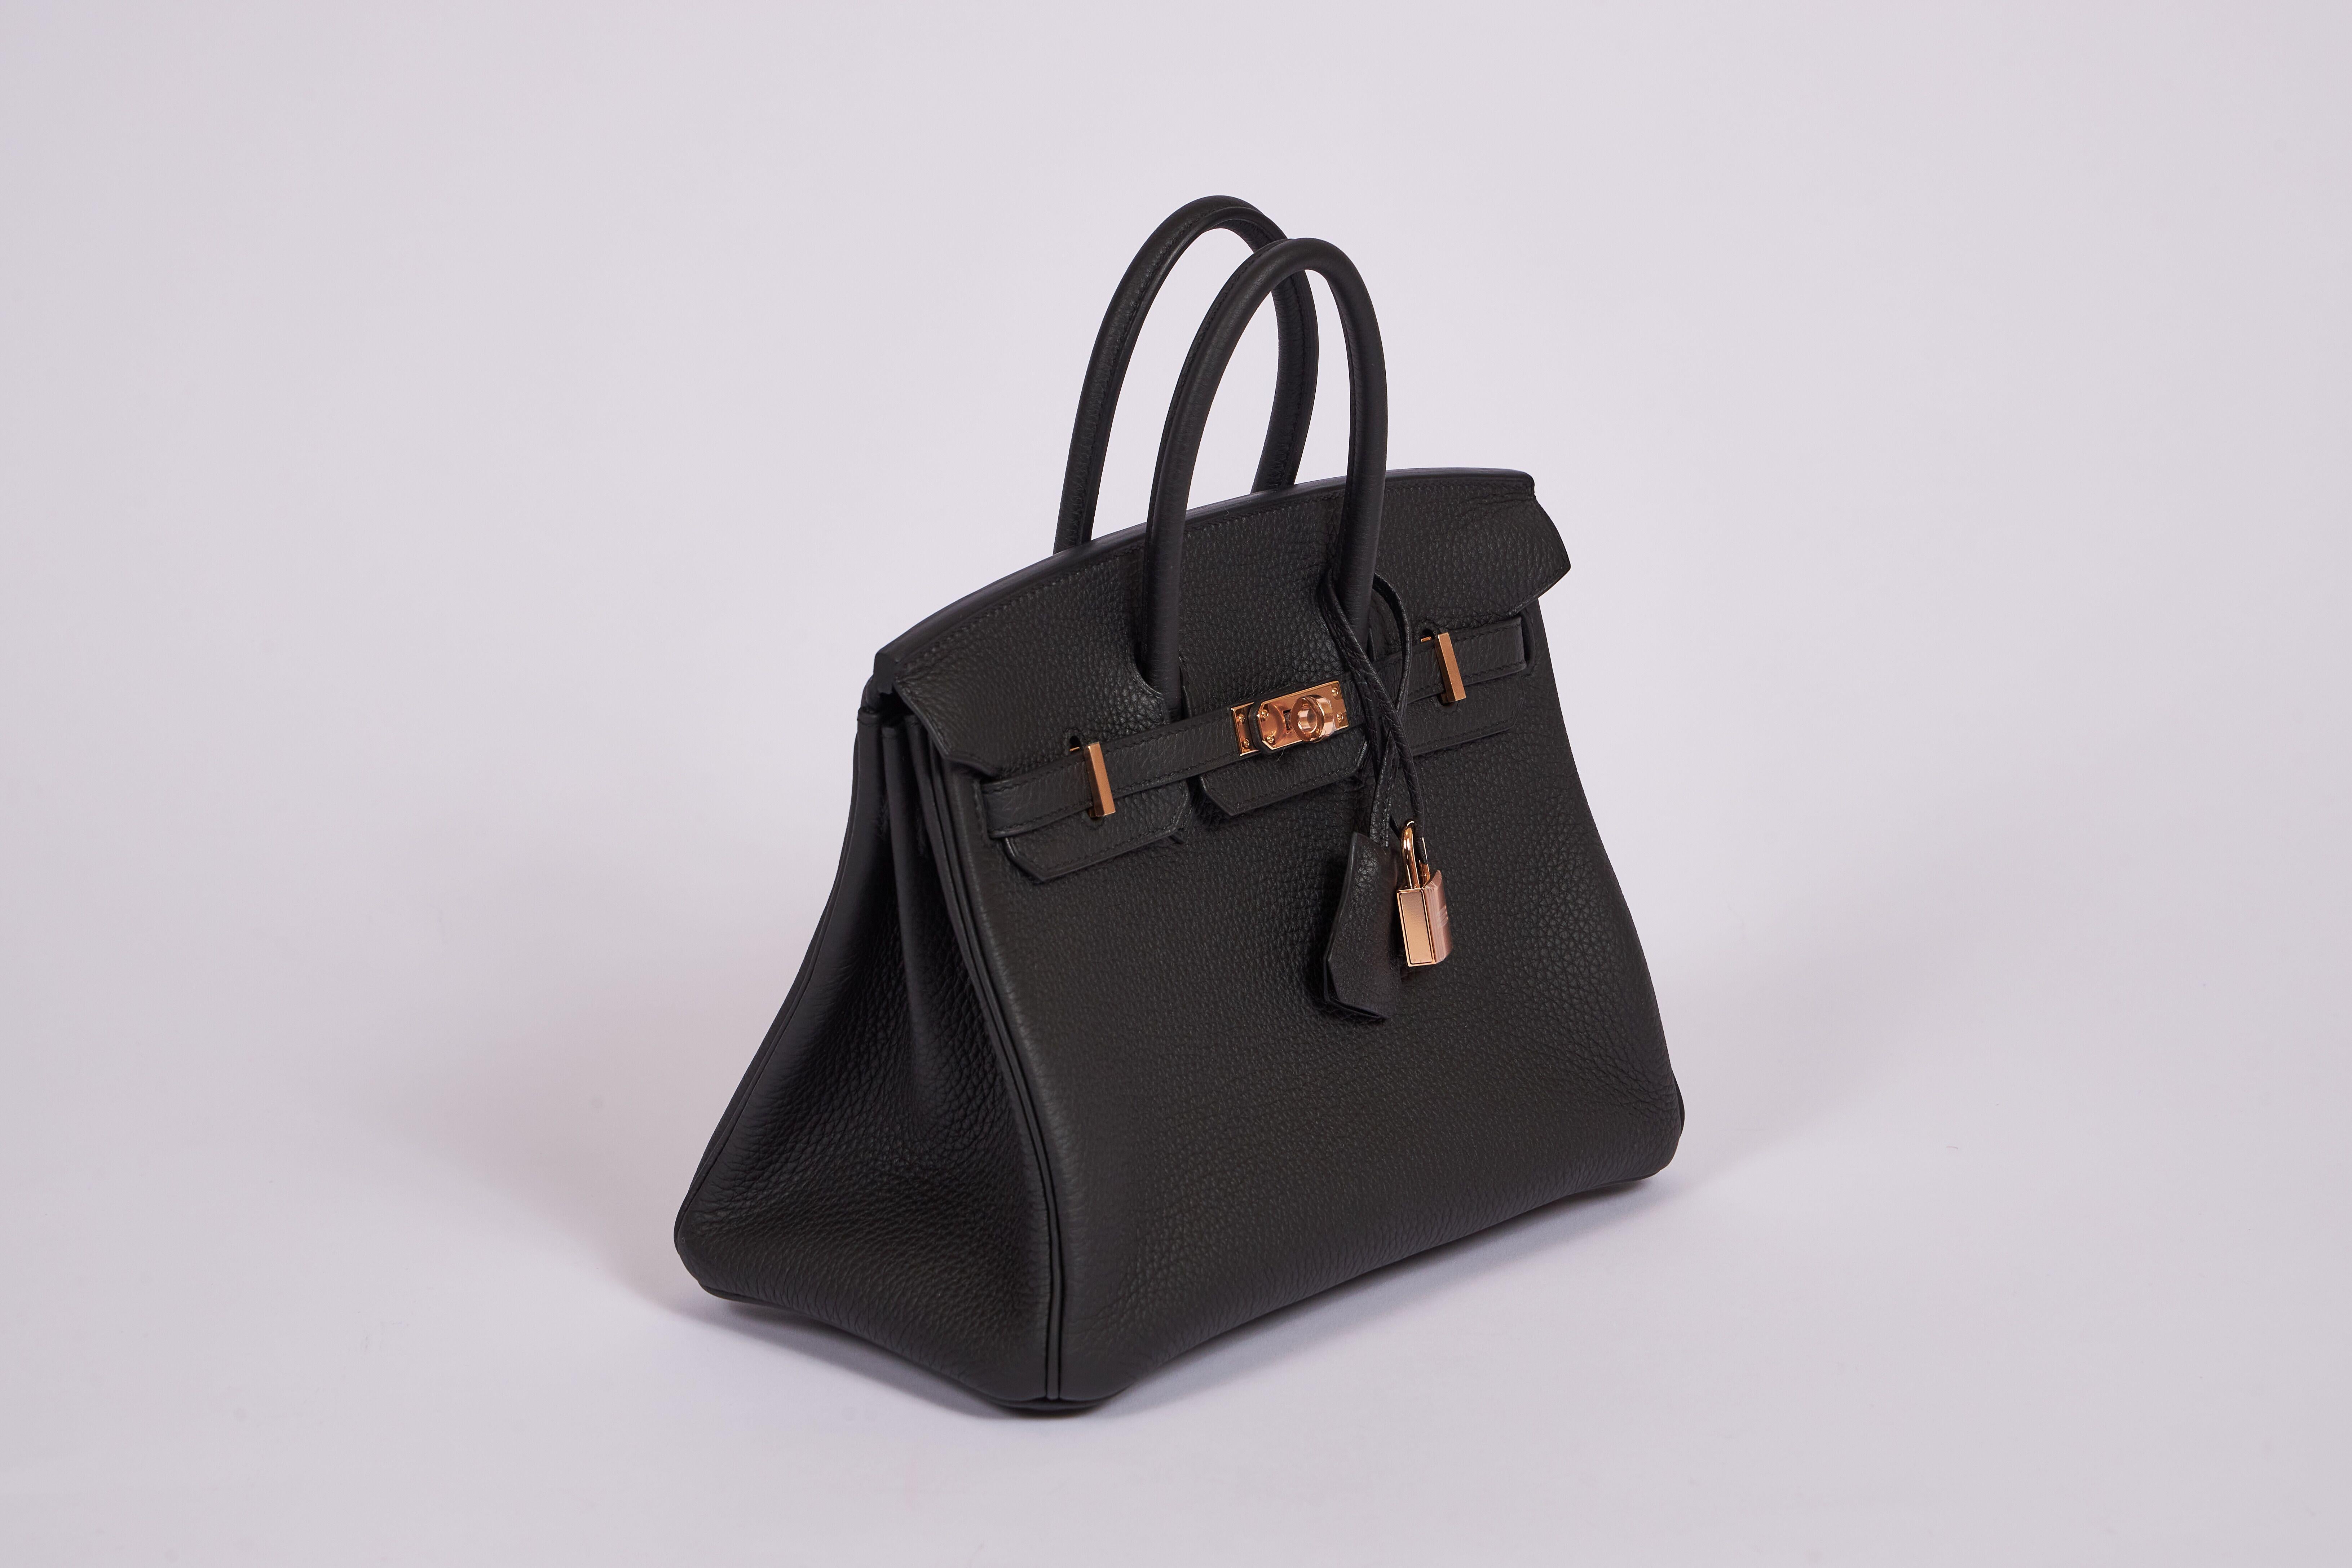 Hermès 25cm Birkin in black togo leather with rose gold hardware. Rare and collectible. Handle drop, 3